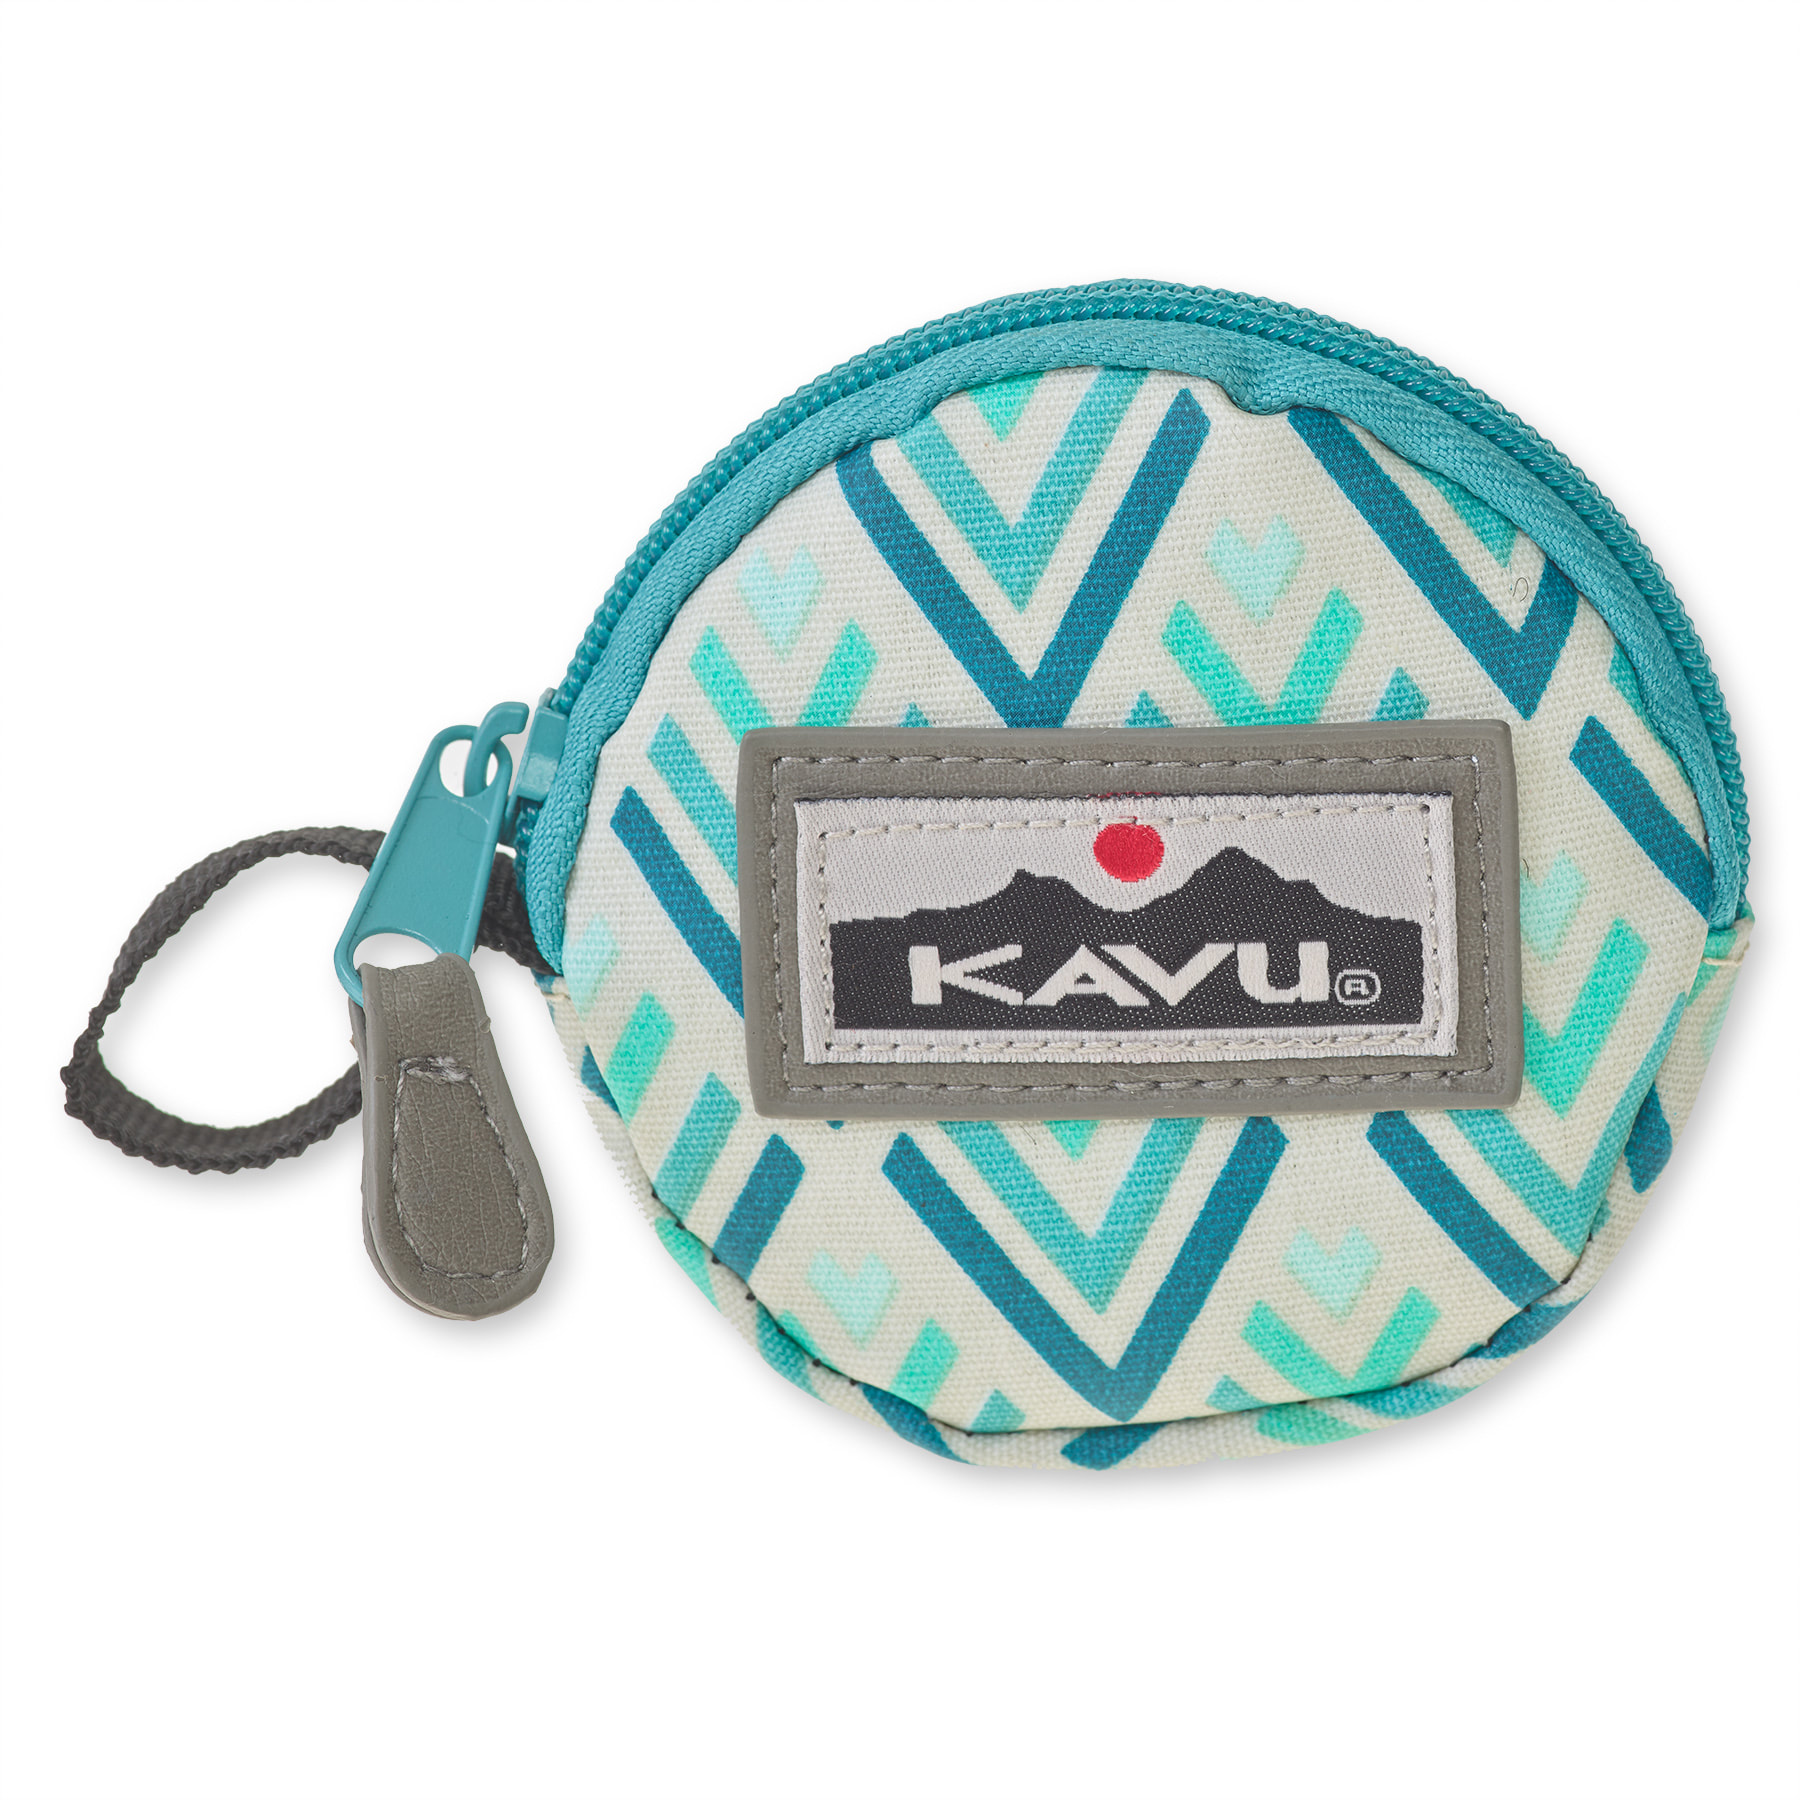 KAVU Powerbox Semi Hard Phone Charger USB Cable Case